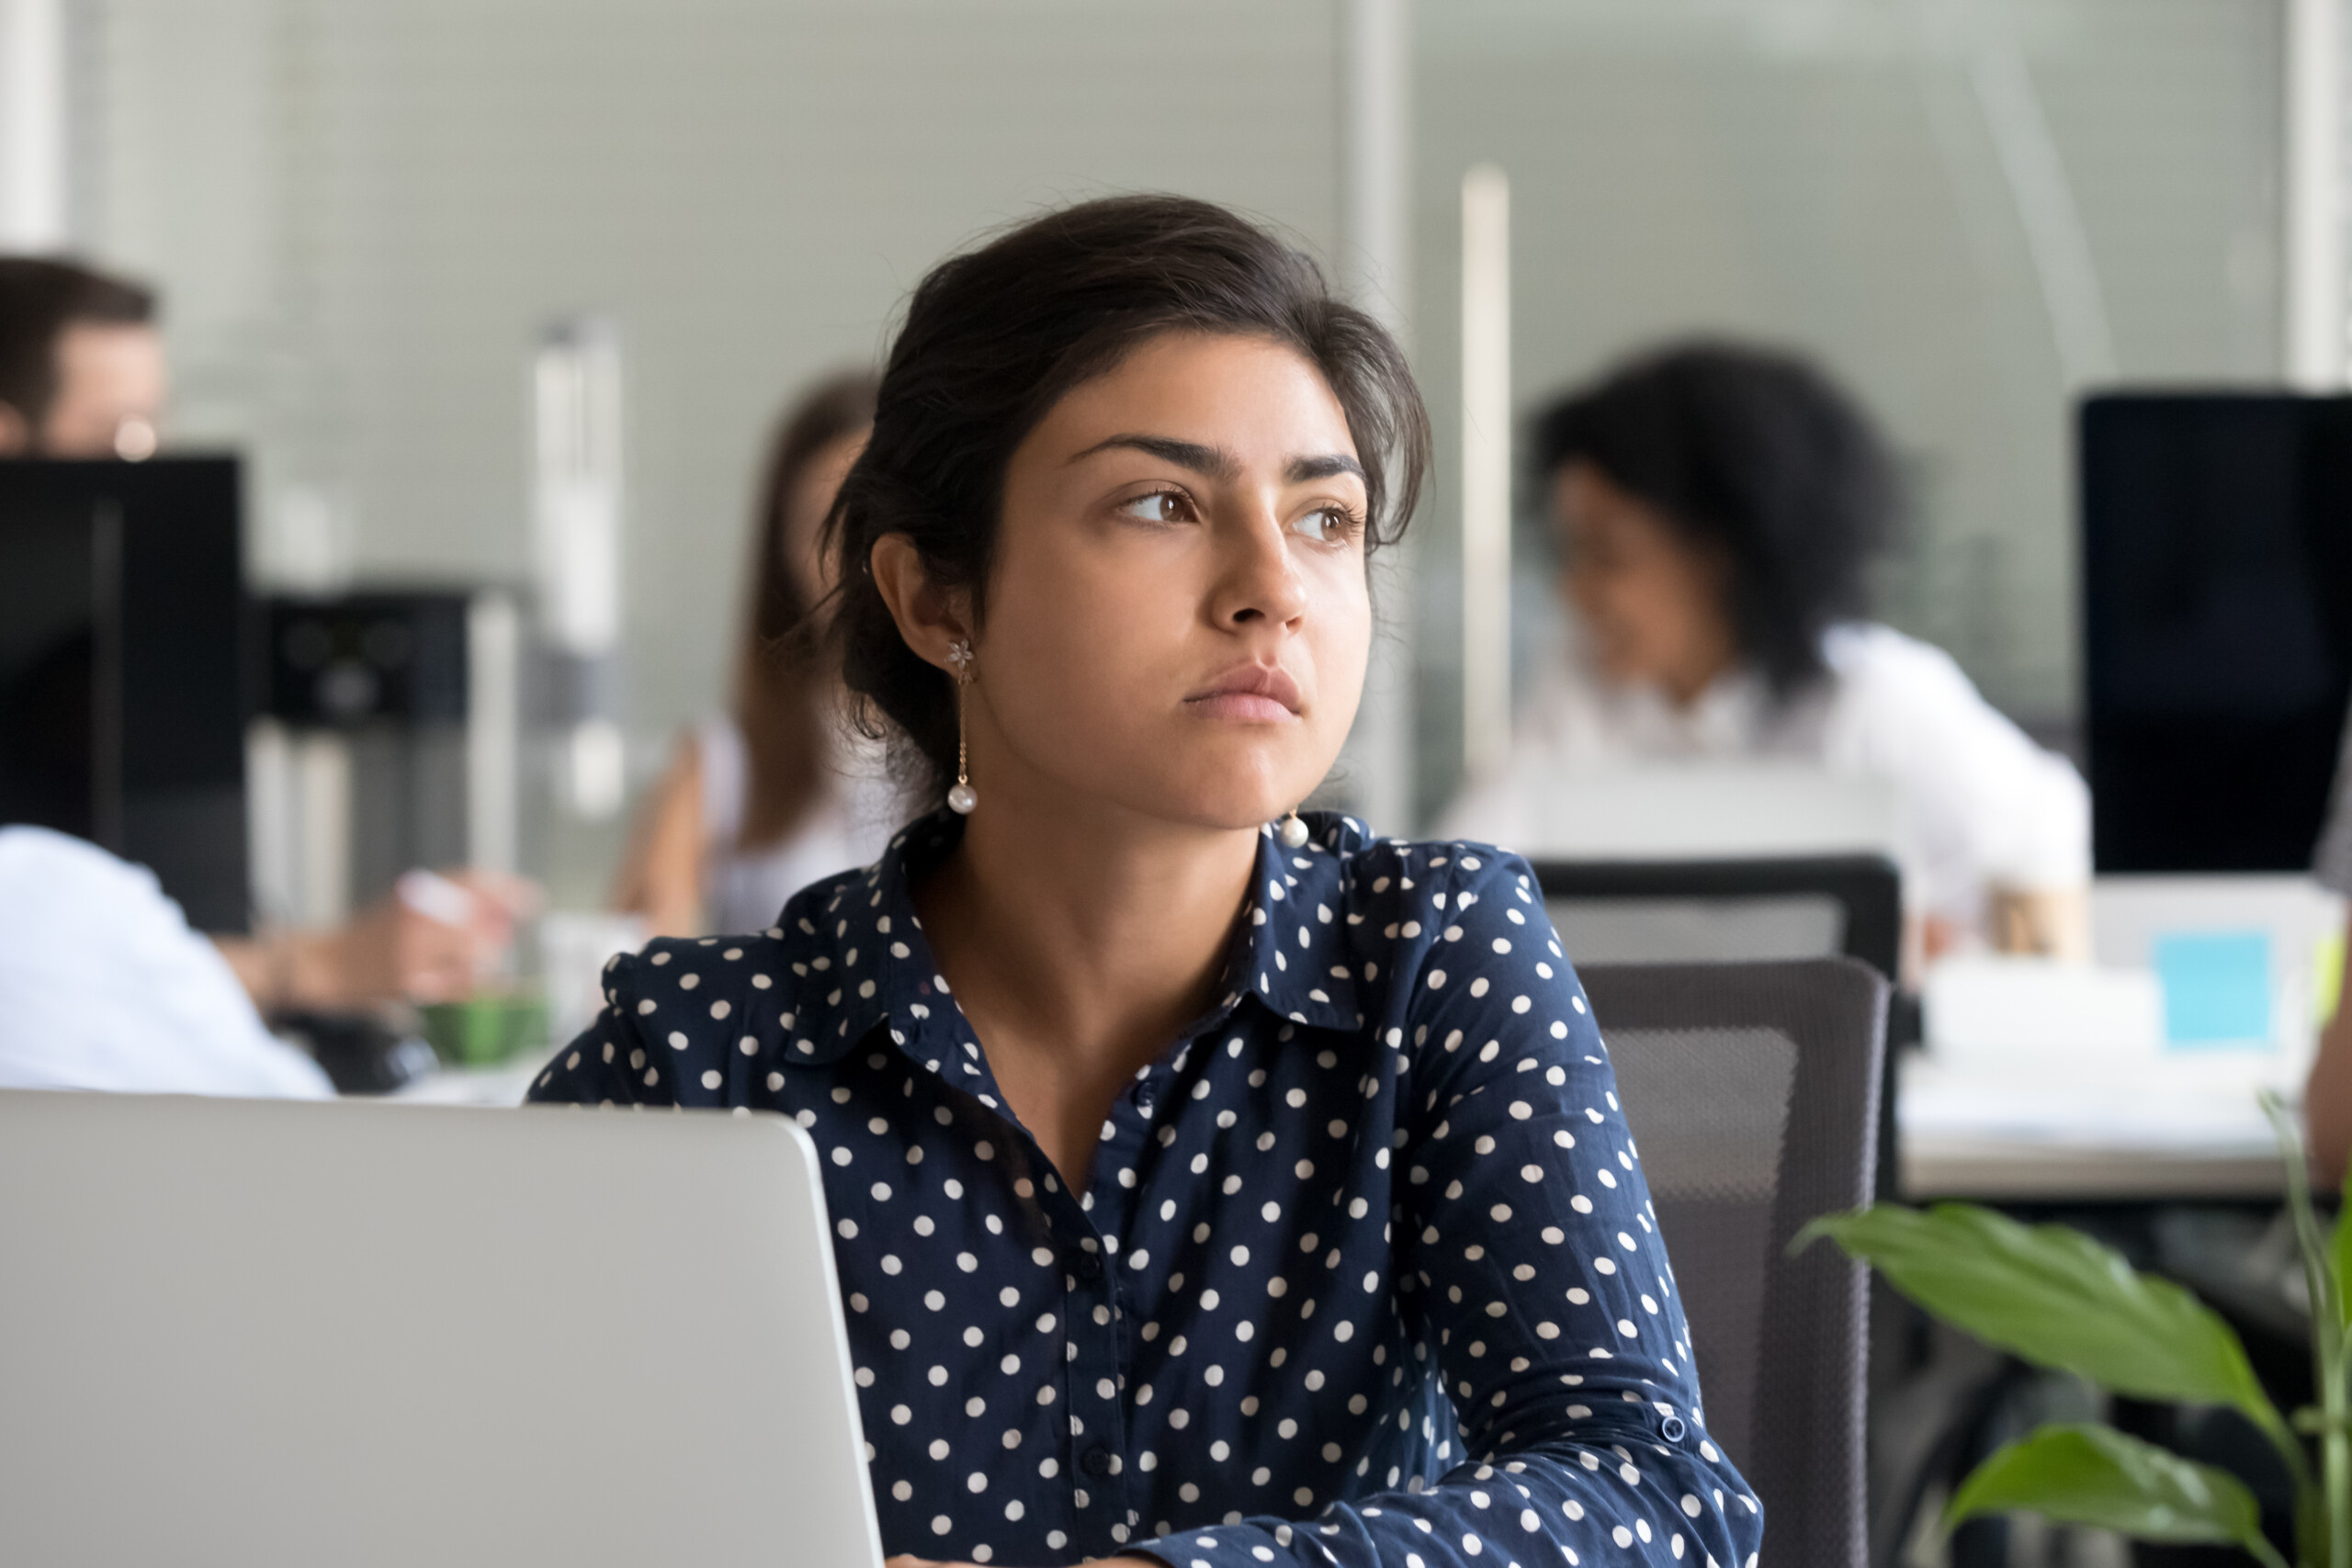 Young business woman sitting in front of her laptop in an office looking off into the distance